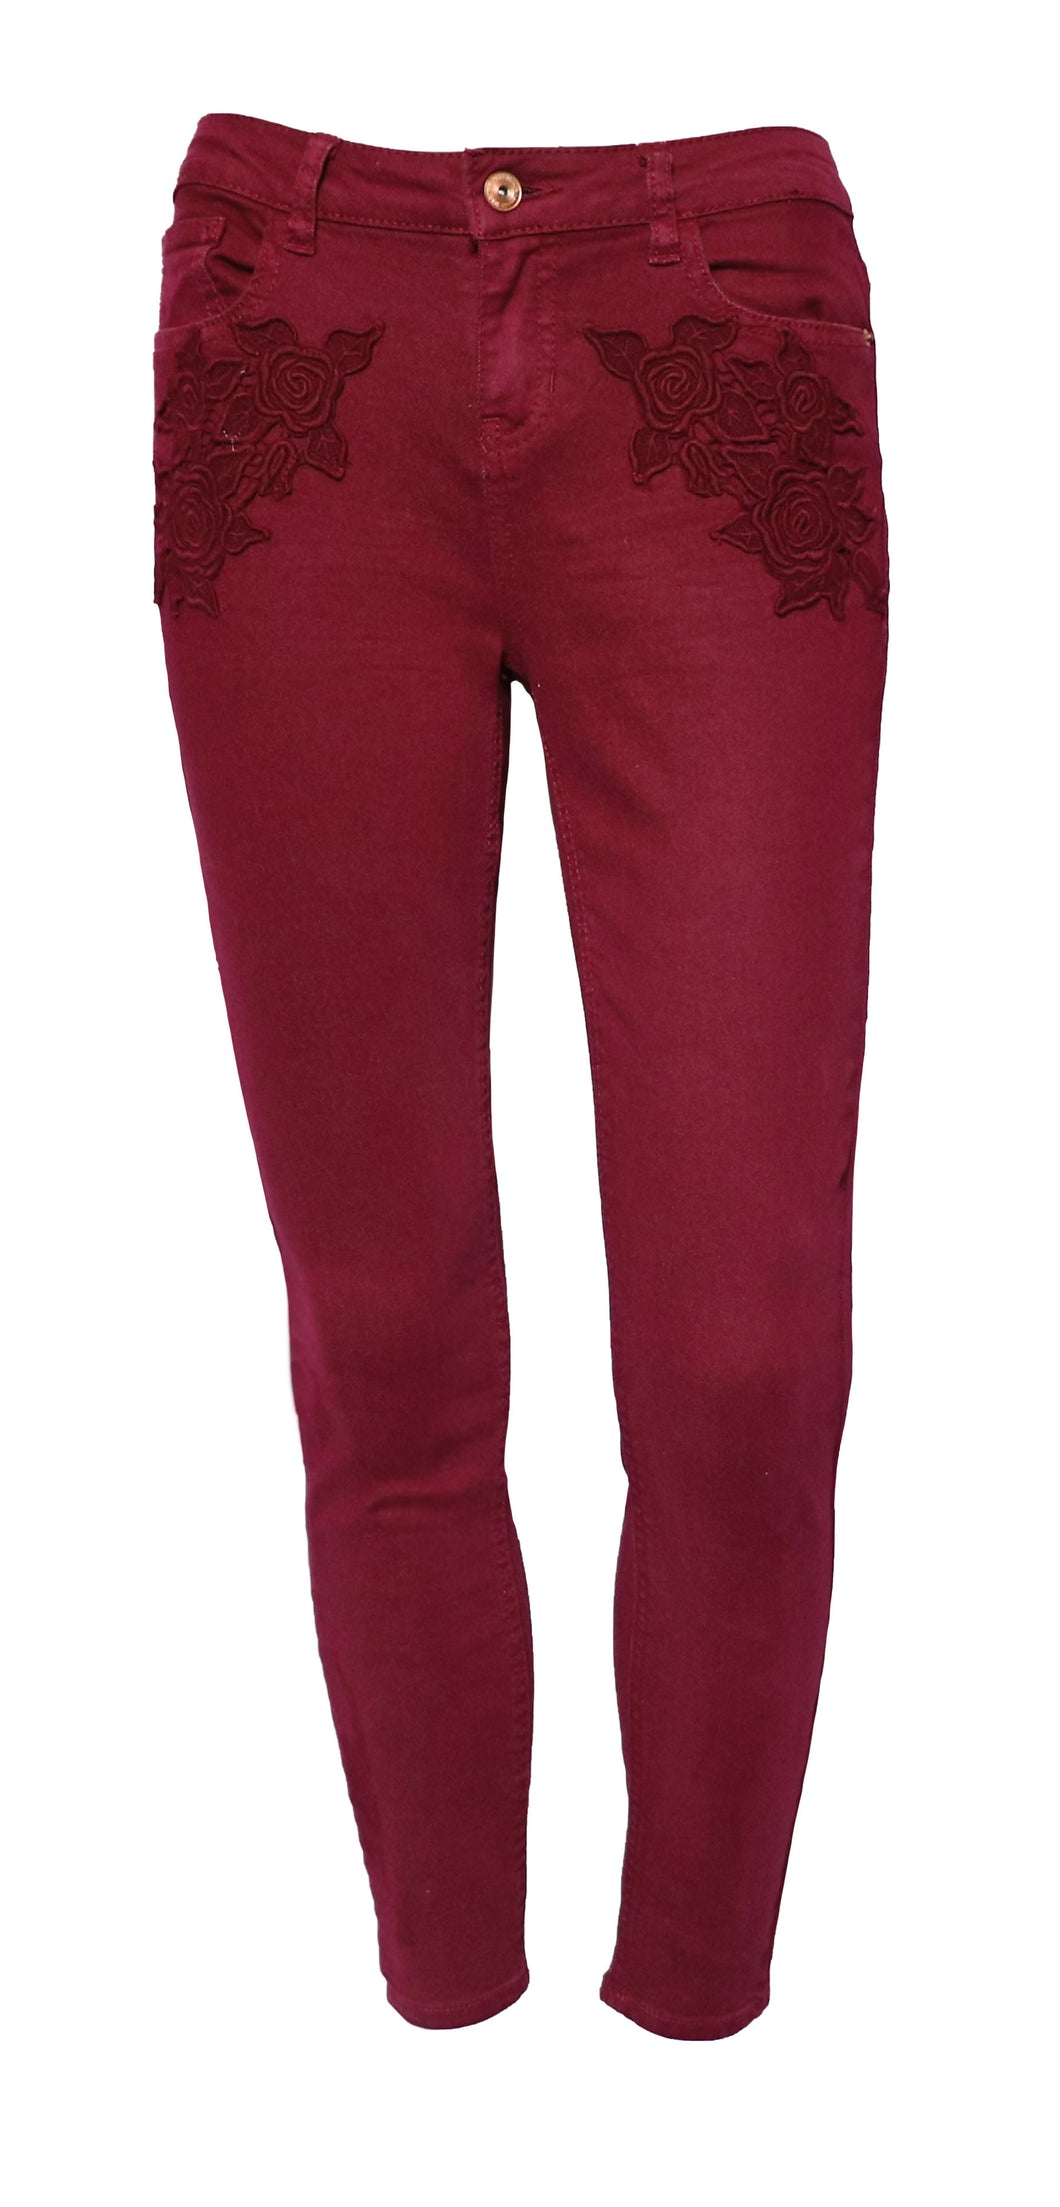 Burgundy mid-rise embroidery jeans